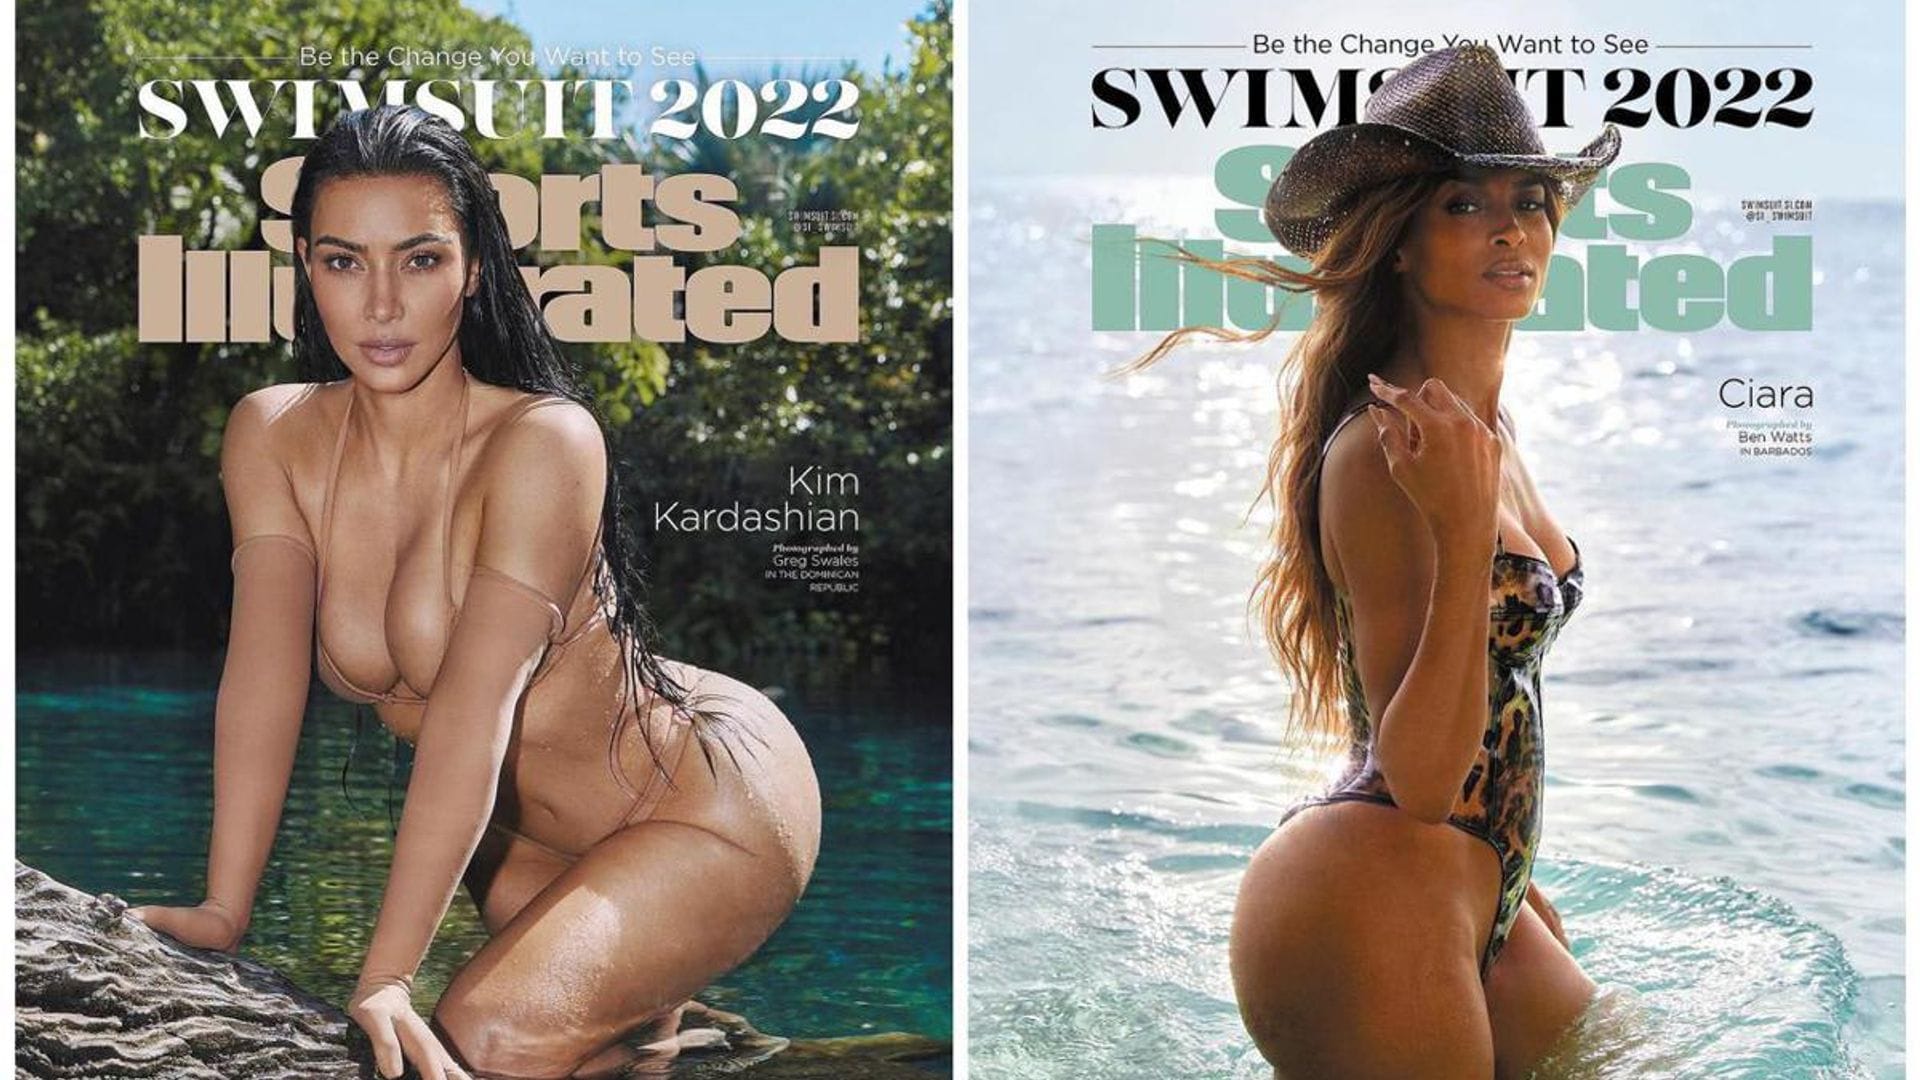 Kim Kardashian, Ciara, and more unveiled as Sports Illustrated Swimsuit’s 2022 cover models